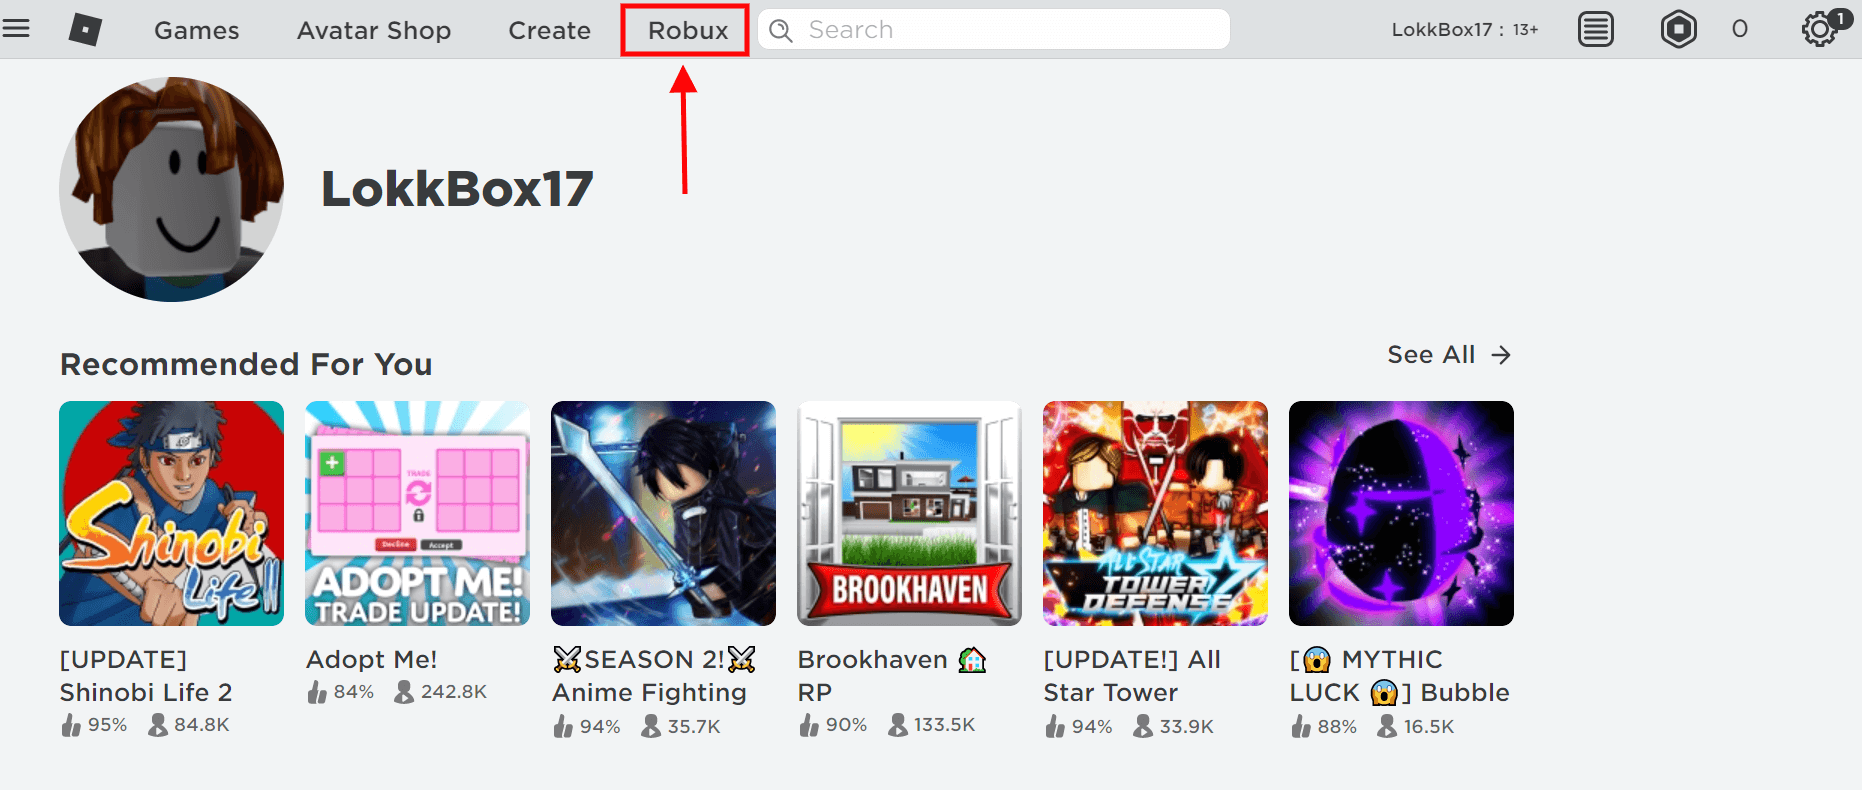 How To Buy Robux Using Globe Or Smart Load Wallet Codes Blog - how much does 400 robux cost in philippines